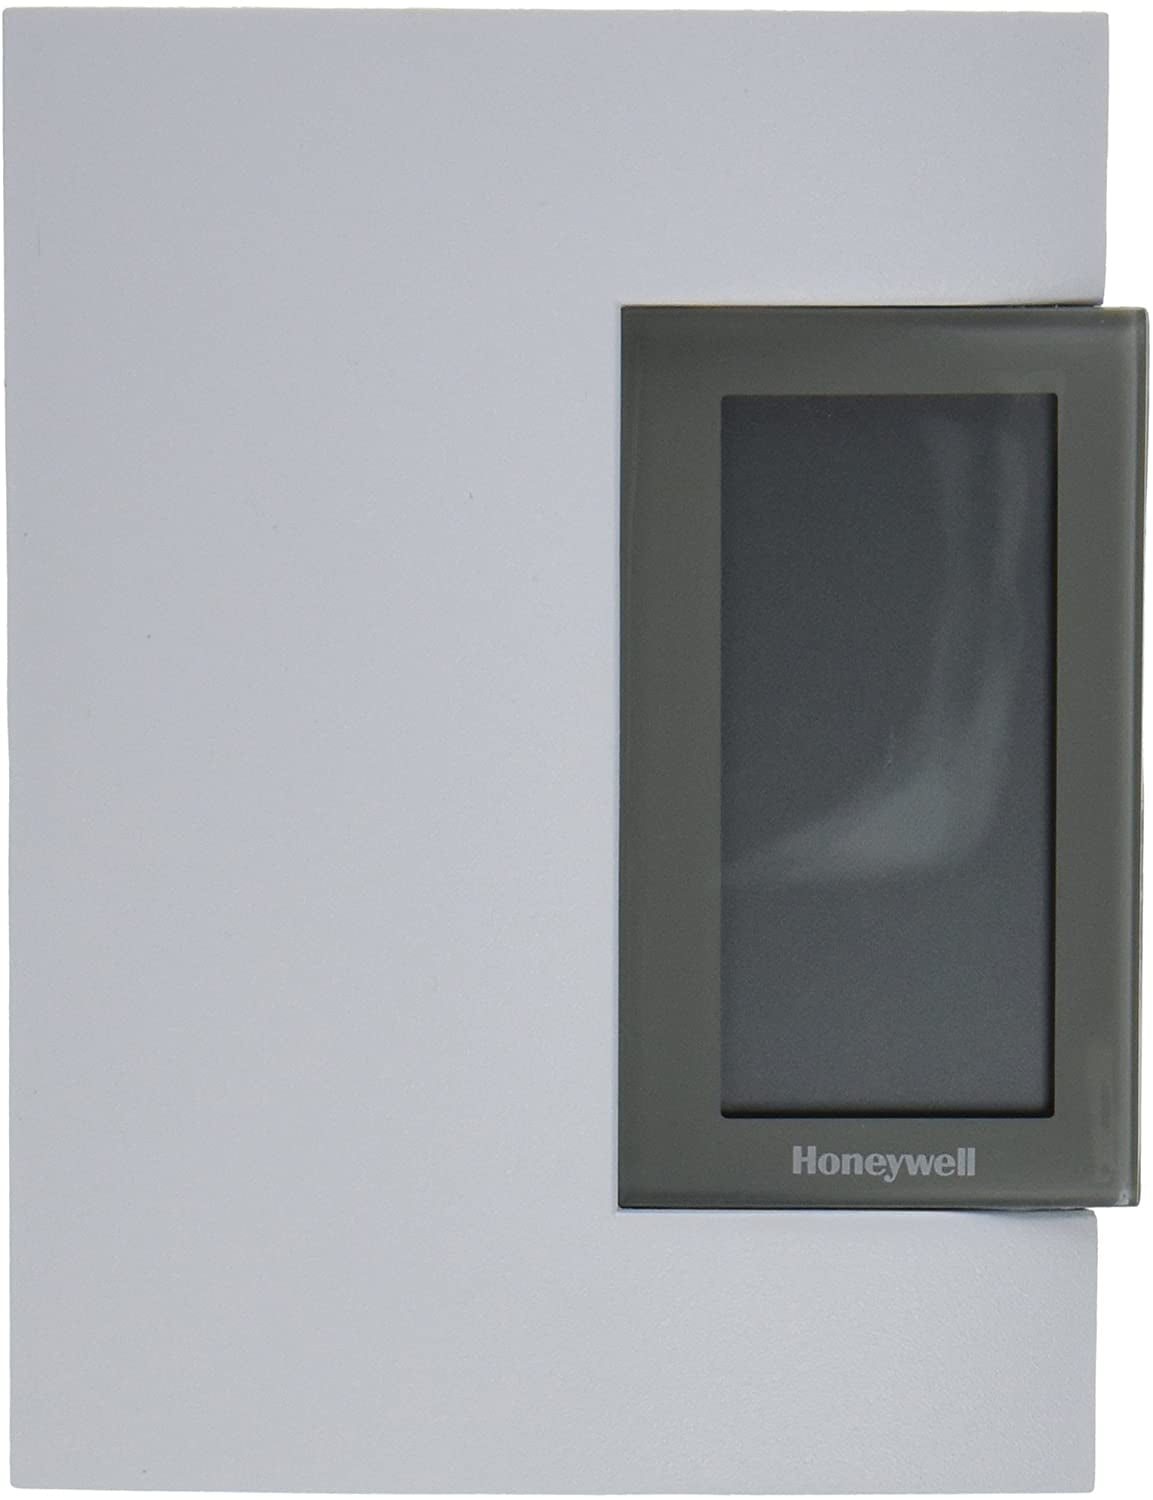 Honeywell 7-Day Programmable Hydronic Thermostat TL8100